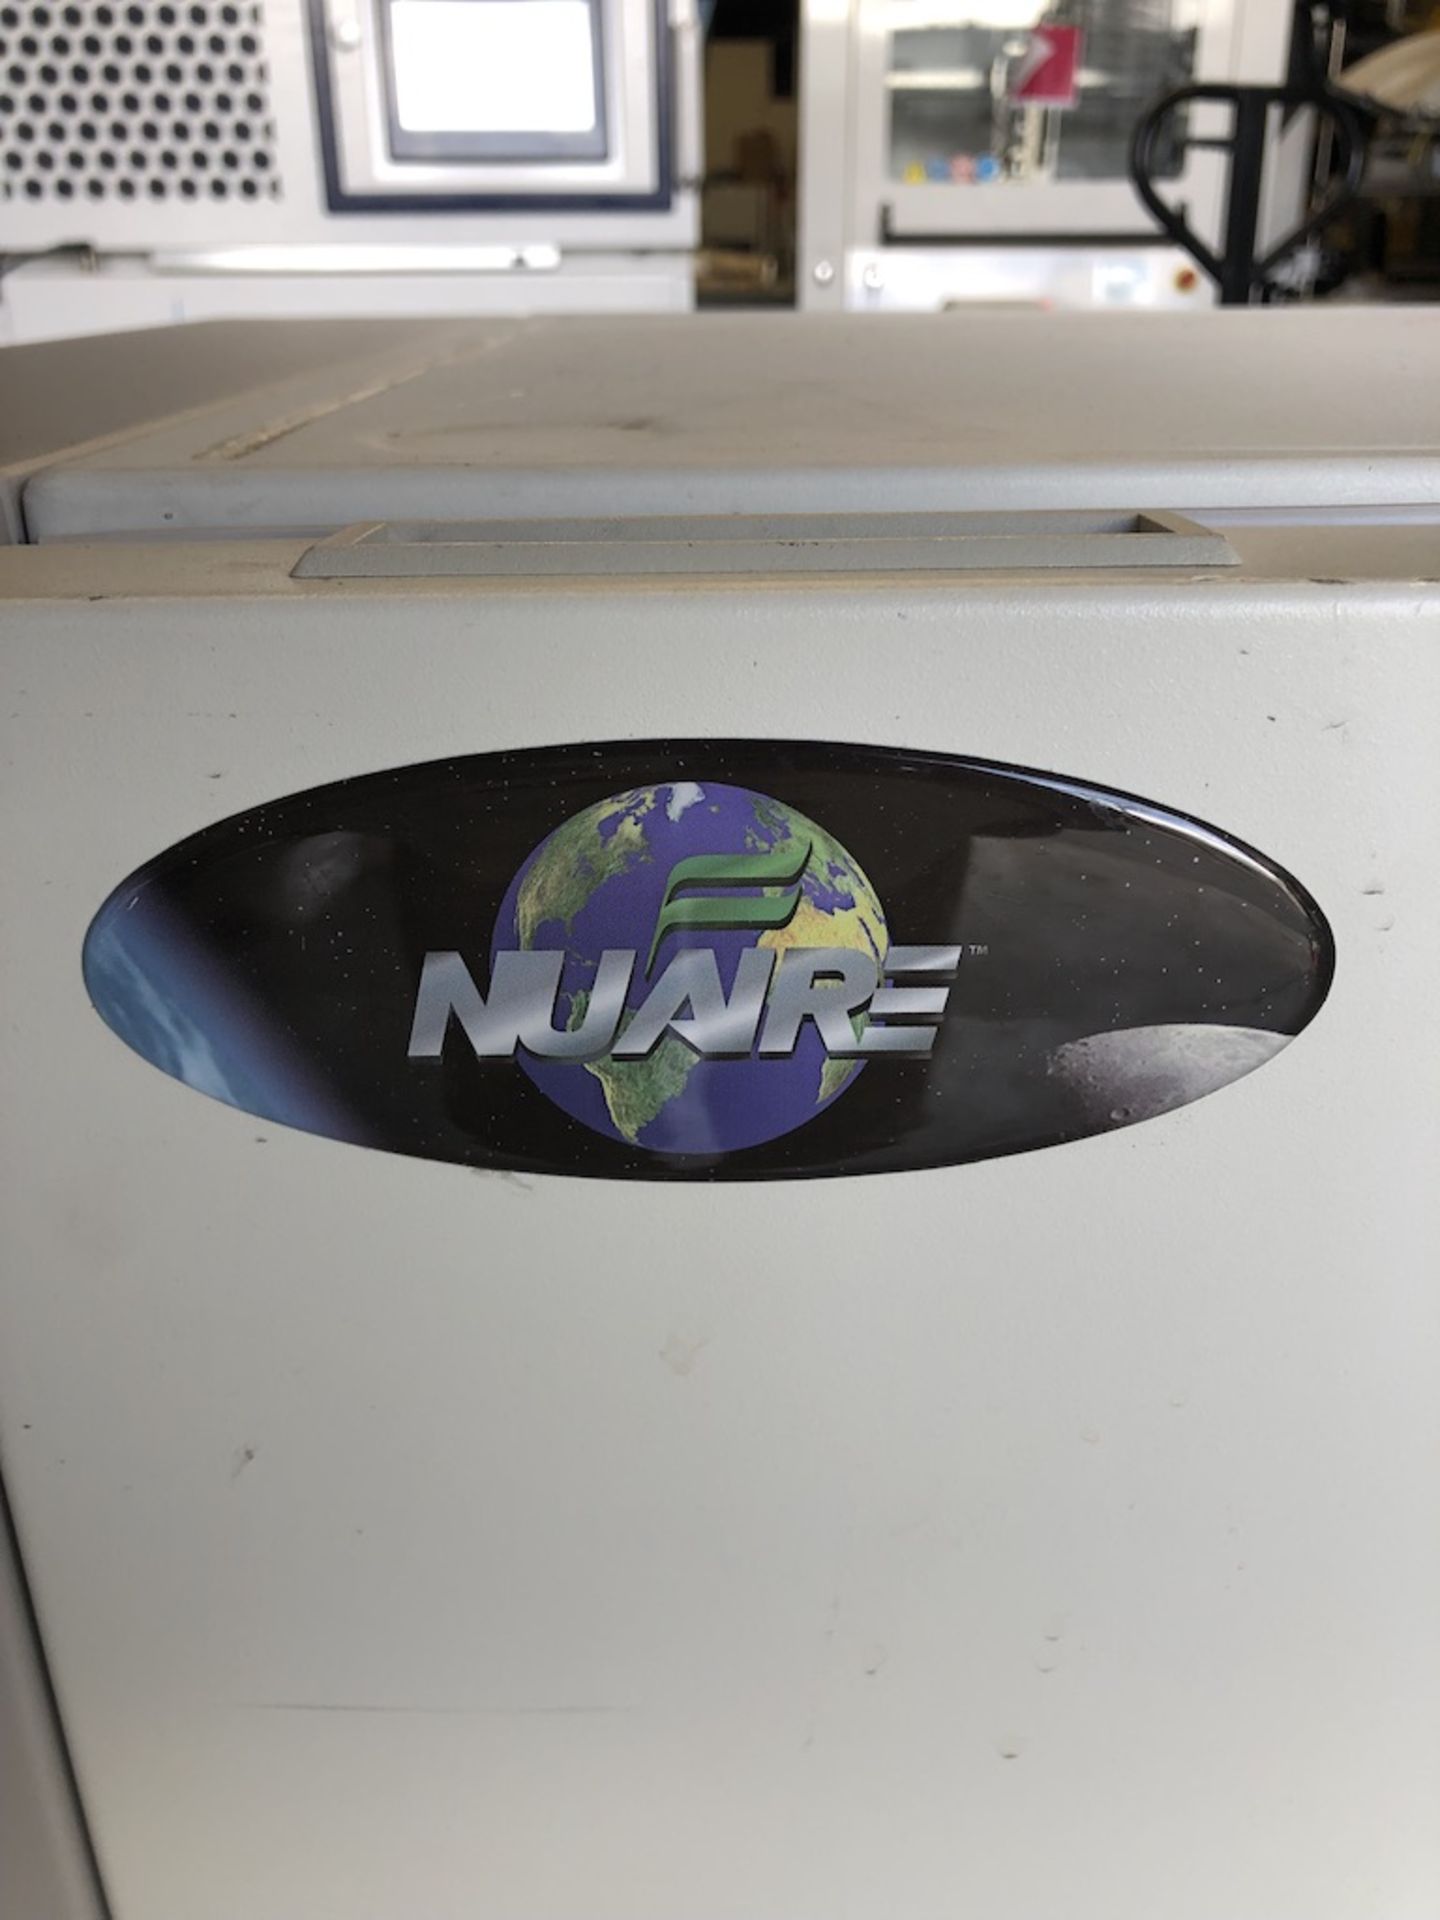 NUAIRE NU-4750 WATER JACKETED CO2 INCUBATOR SERIES 10, 115 AC, 60Hz - Image 2 of 15